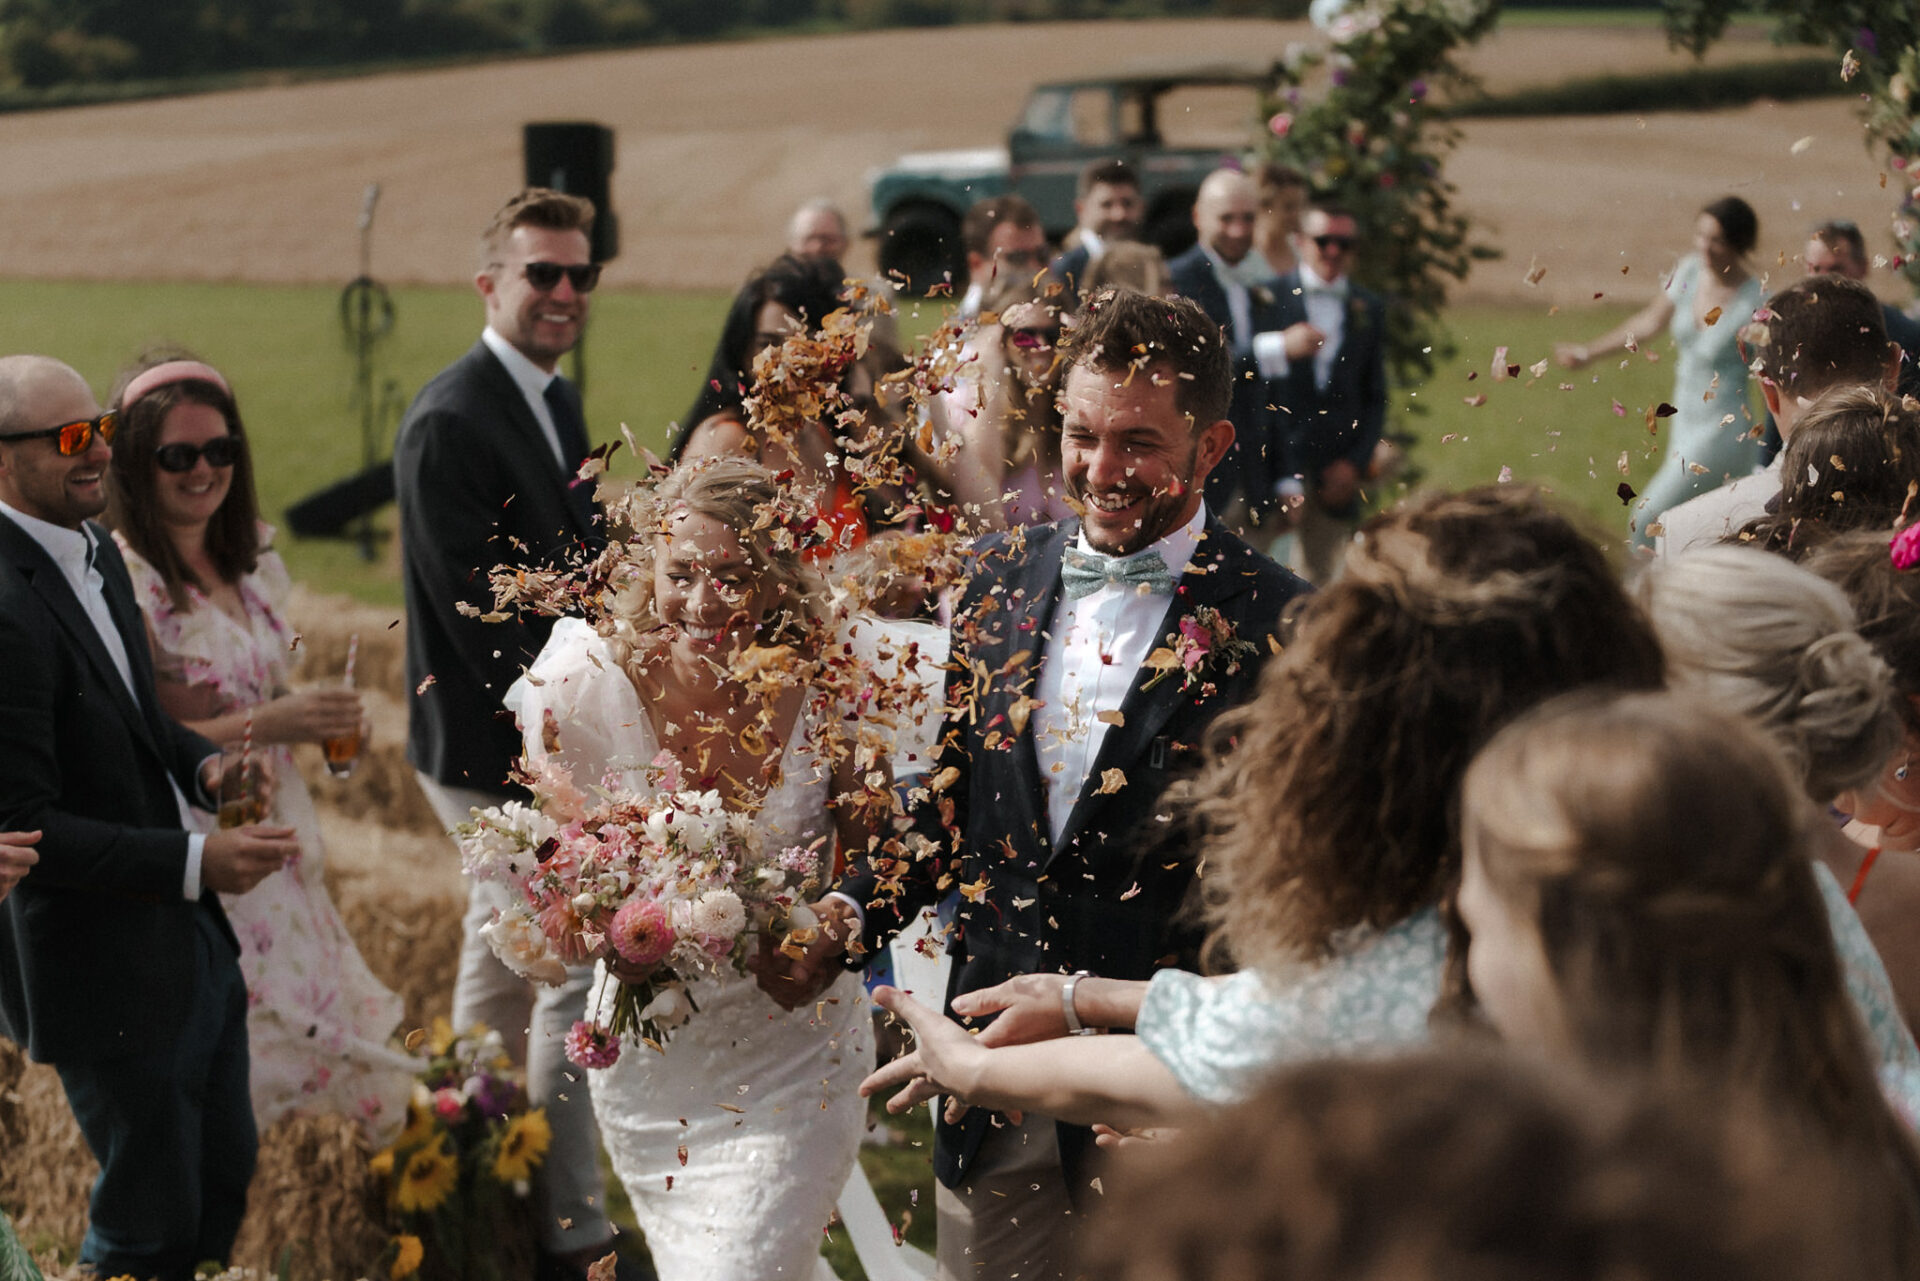 A joyful bride and groom walking through a shower of confetti with guests looking on.